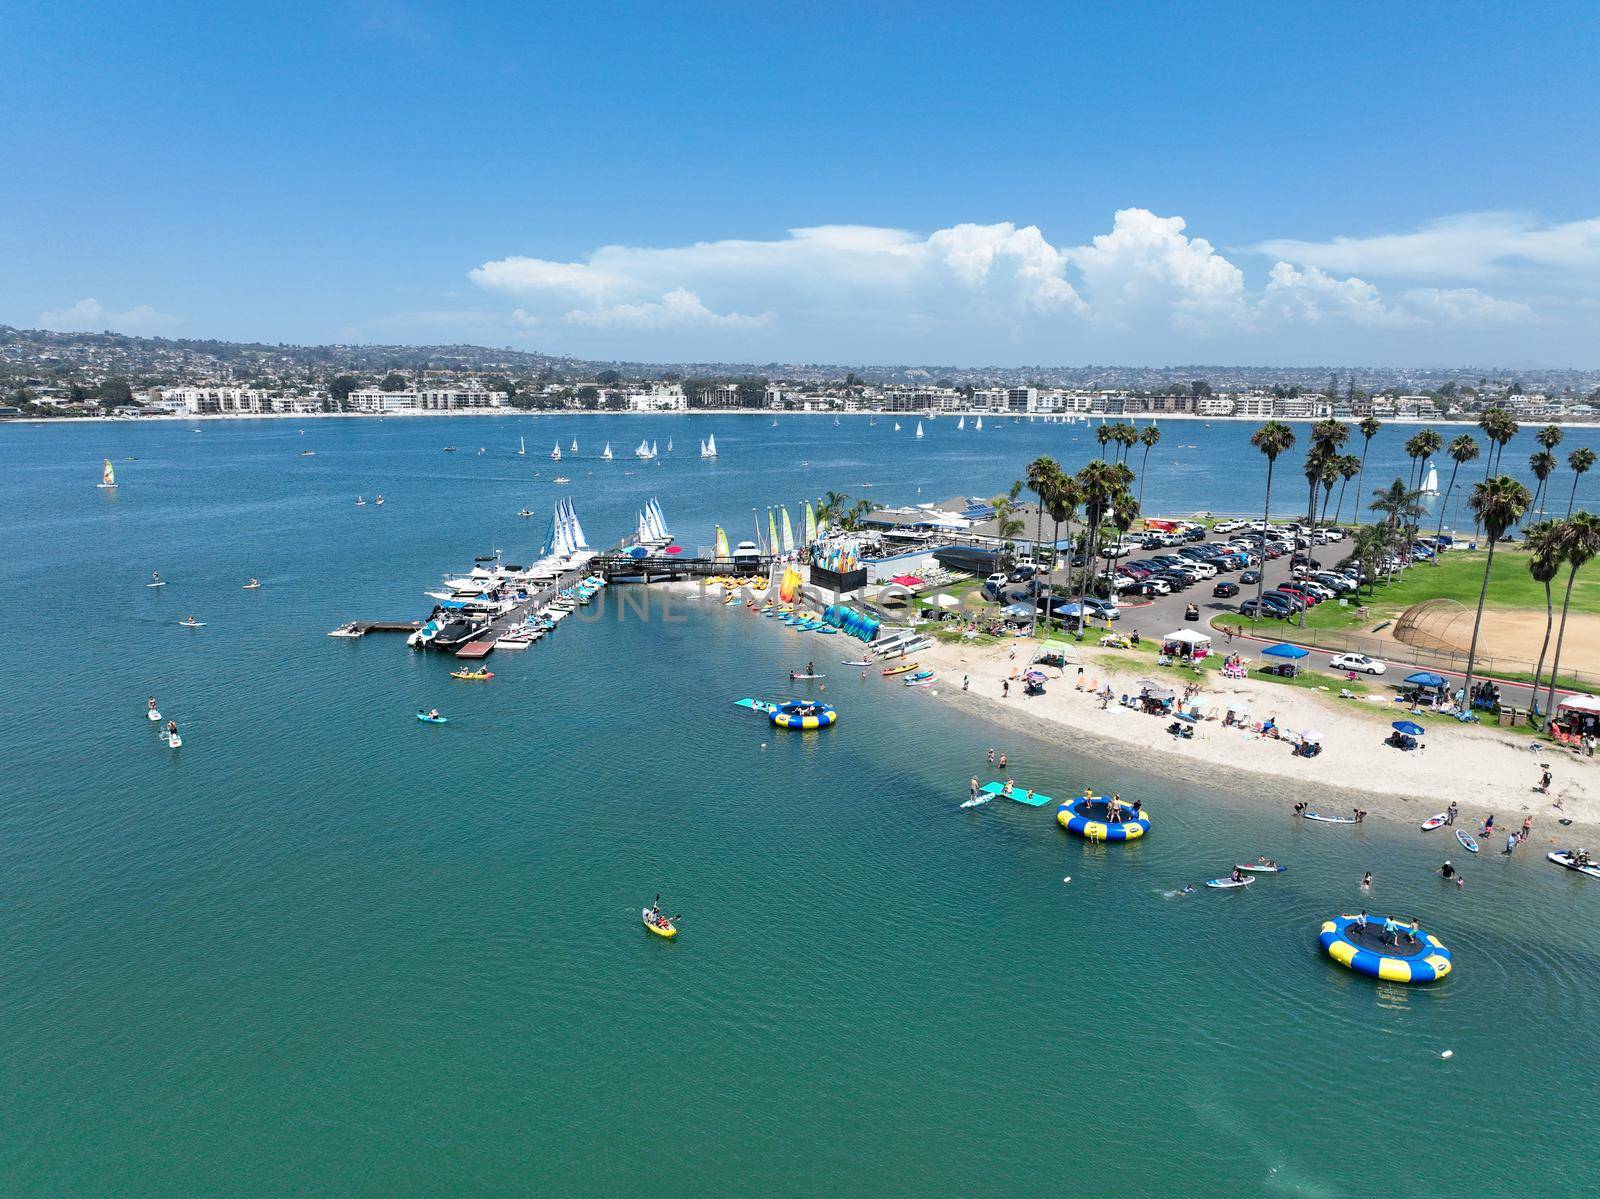 Aerial view of boats and kayaks in Mission Bay water sports zone in San Diego, California. USA. by Bonandbon